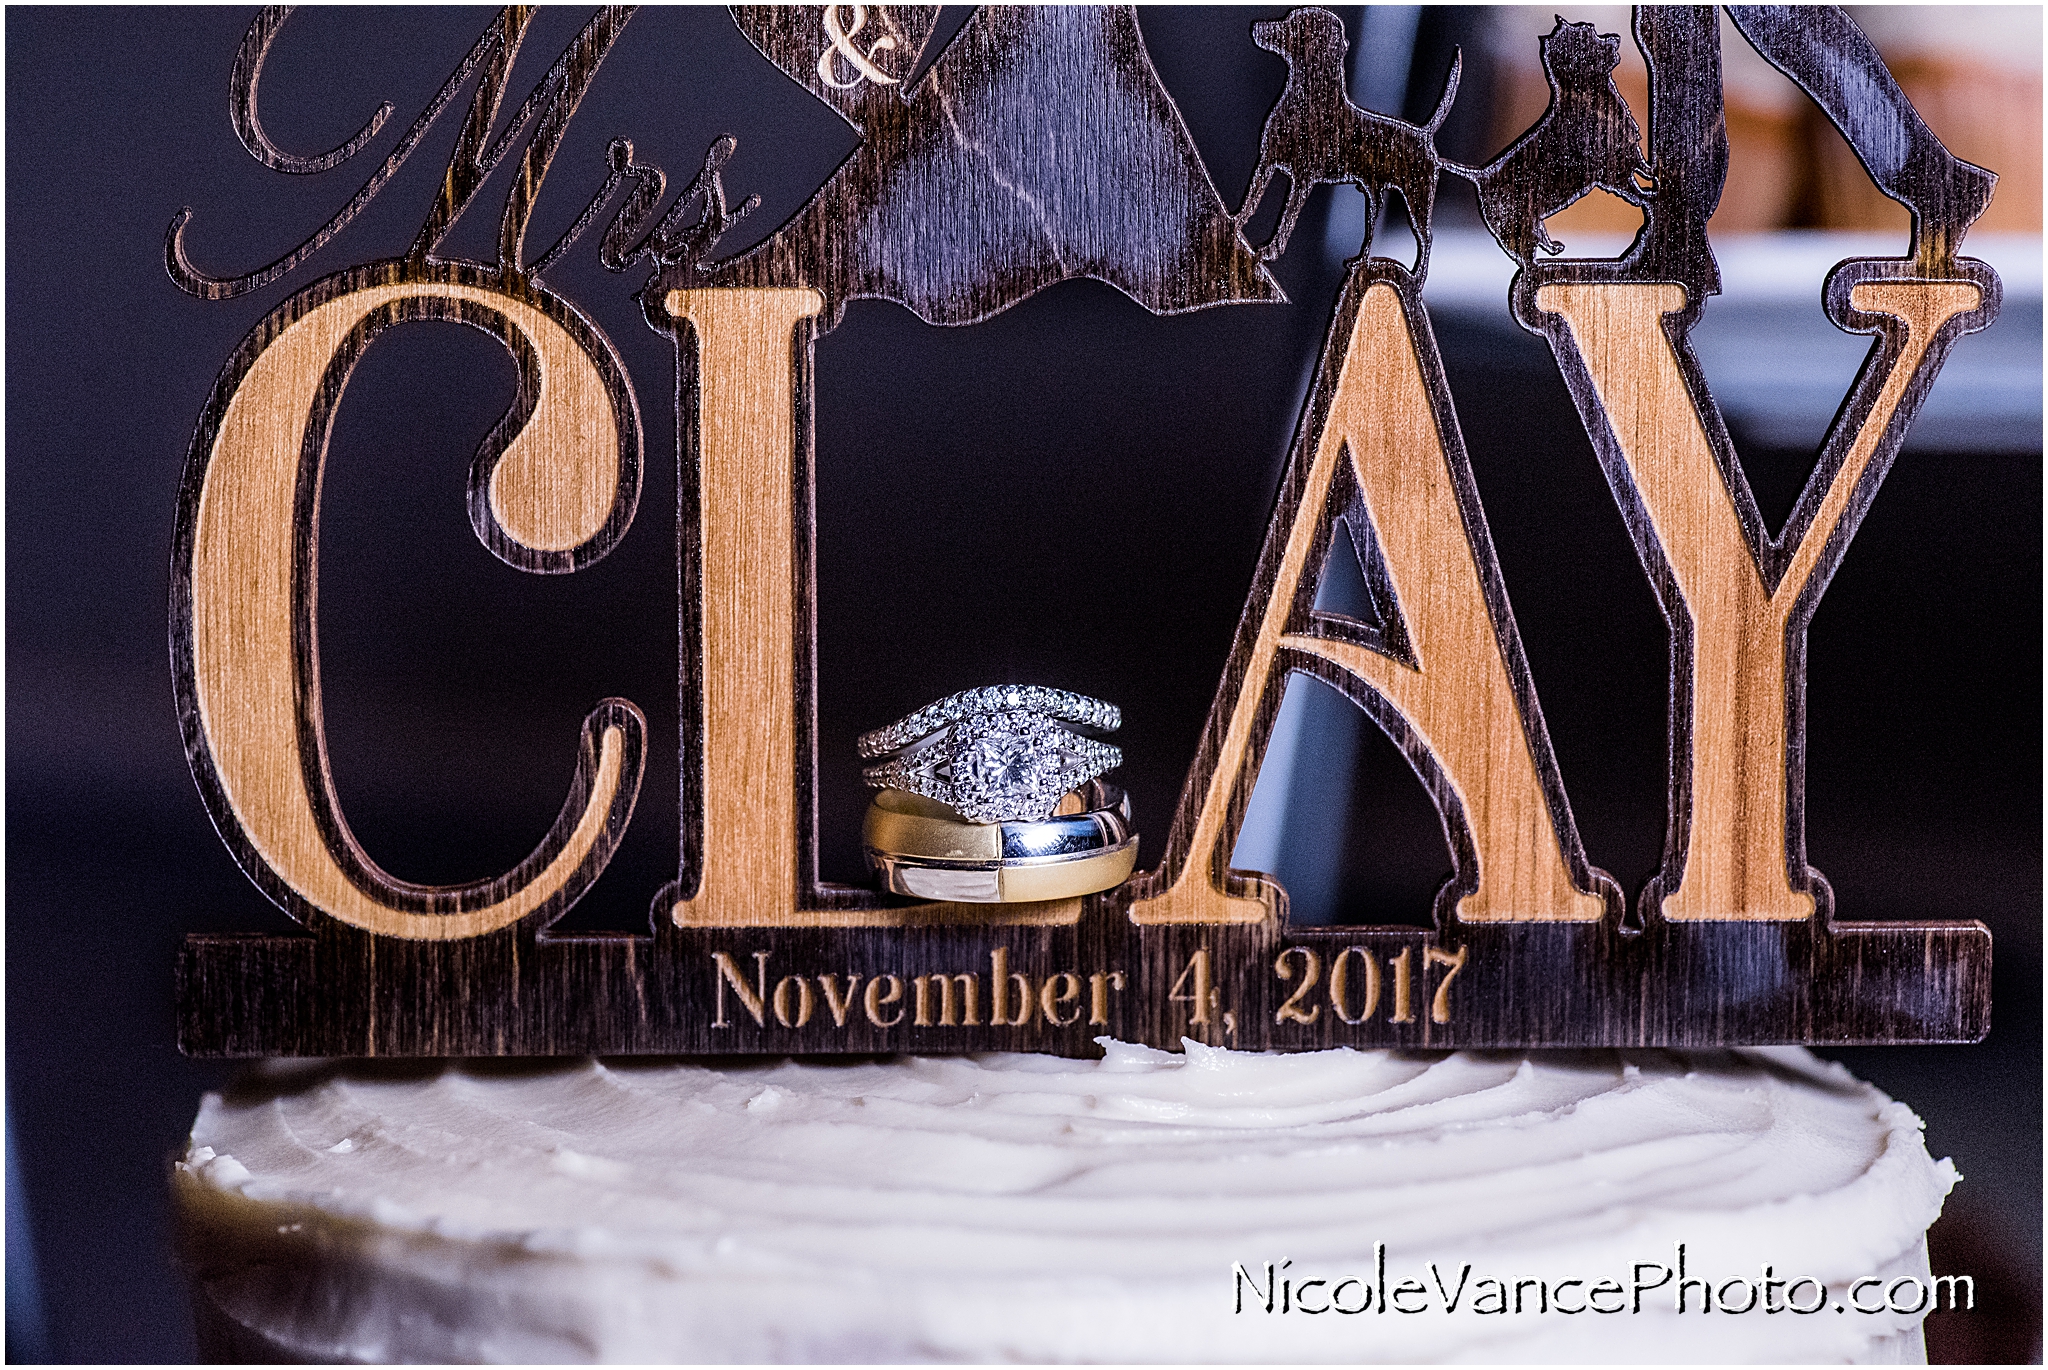 I love this ring shot with the laser etched cake topper displaying their names and wedding date.